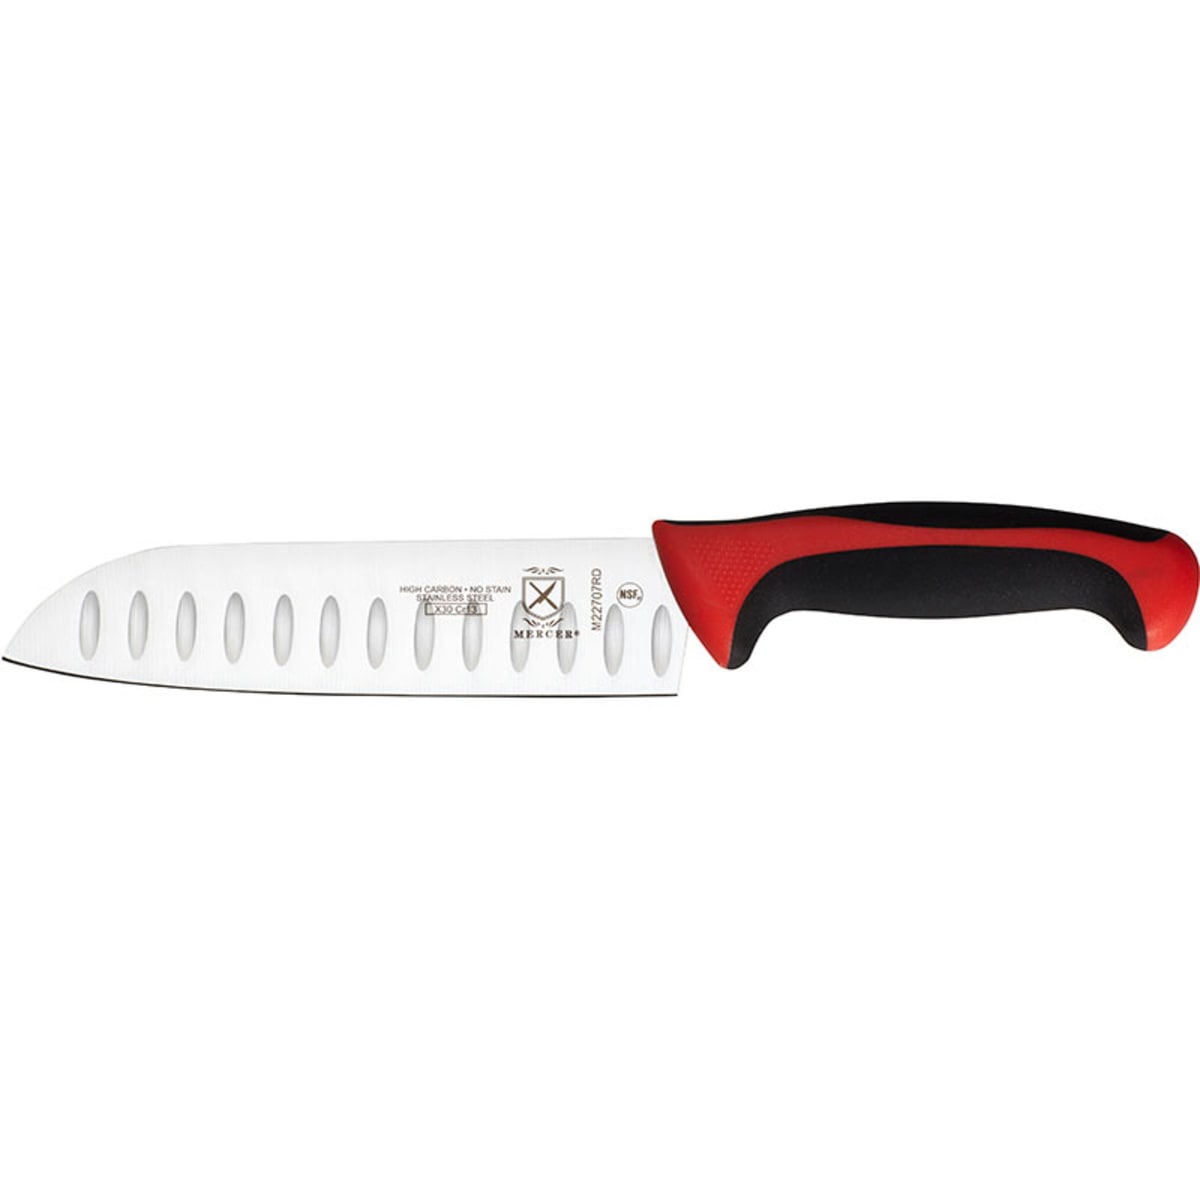 Mercer Culinary Asian Collection Santoku Knife with NSF Handle